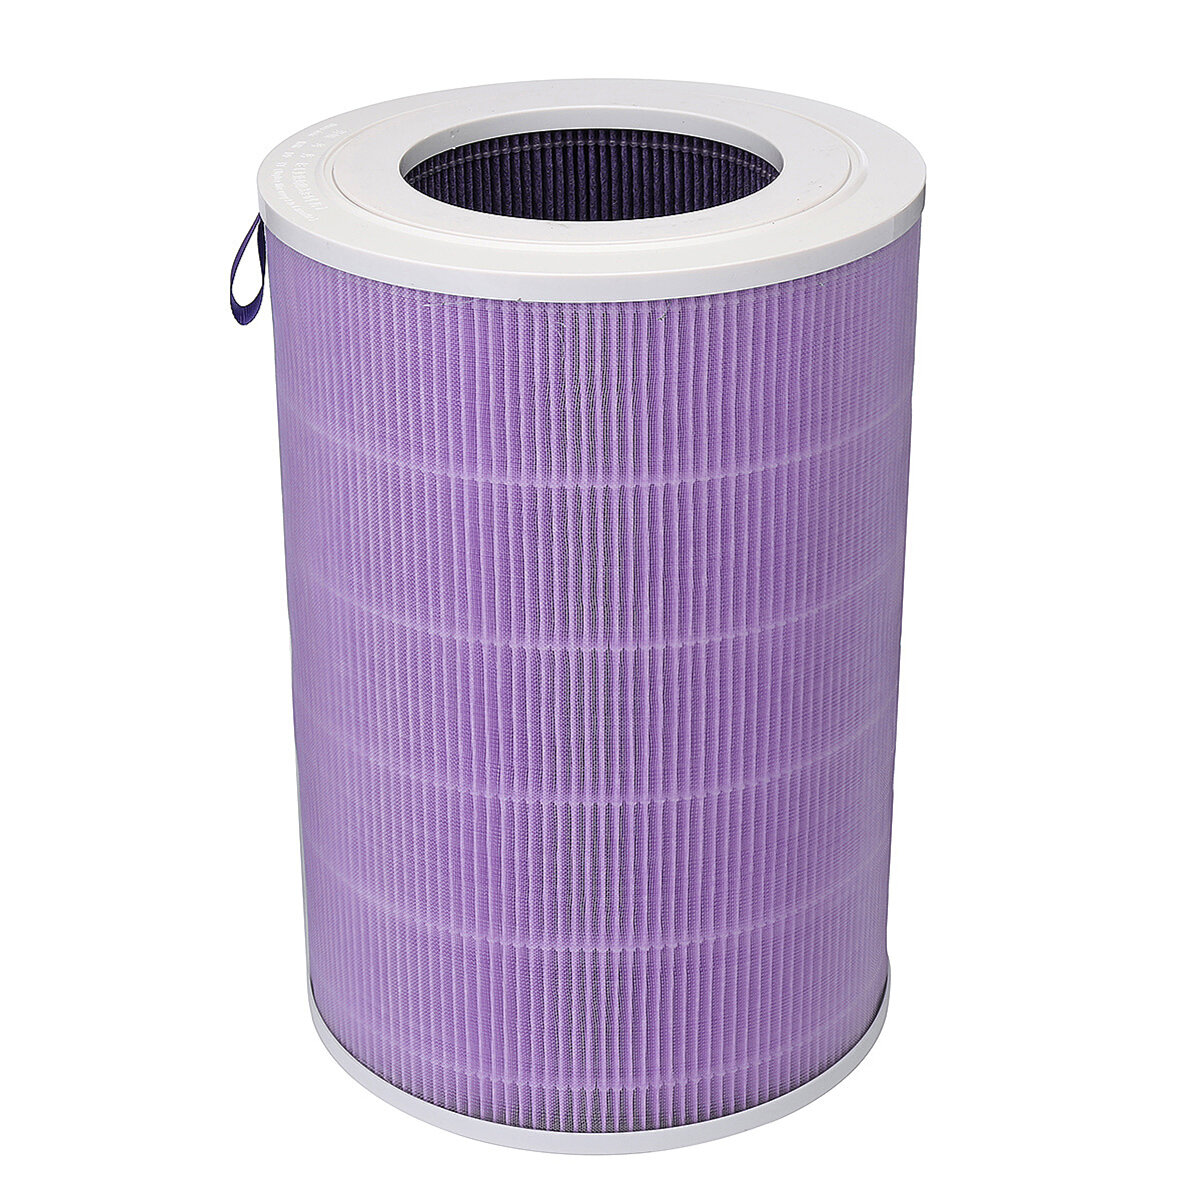 best price,purple,filter,for,xiaomi,air,purifier,not,original,coupon,price,discount